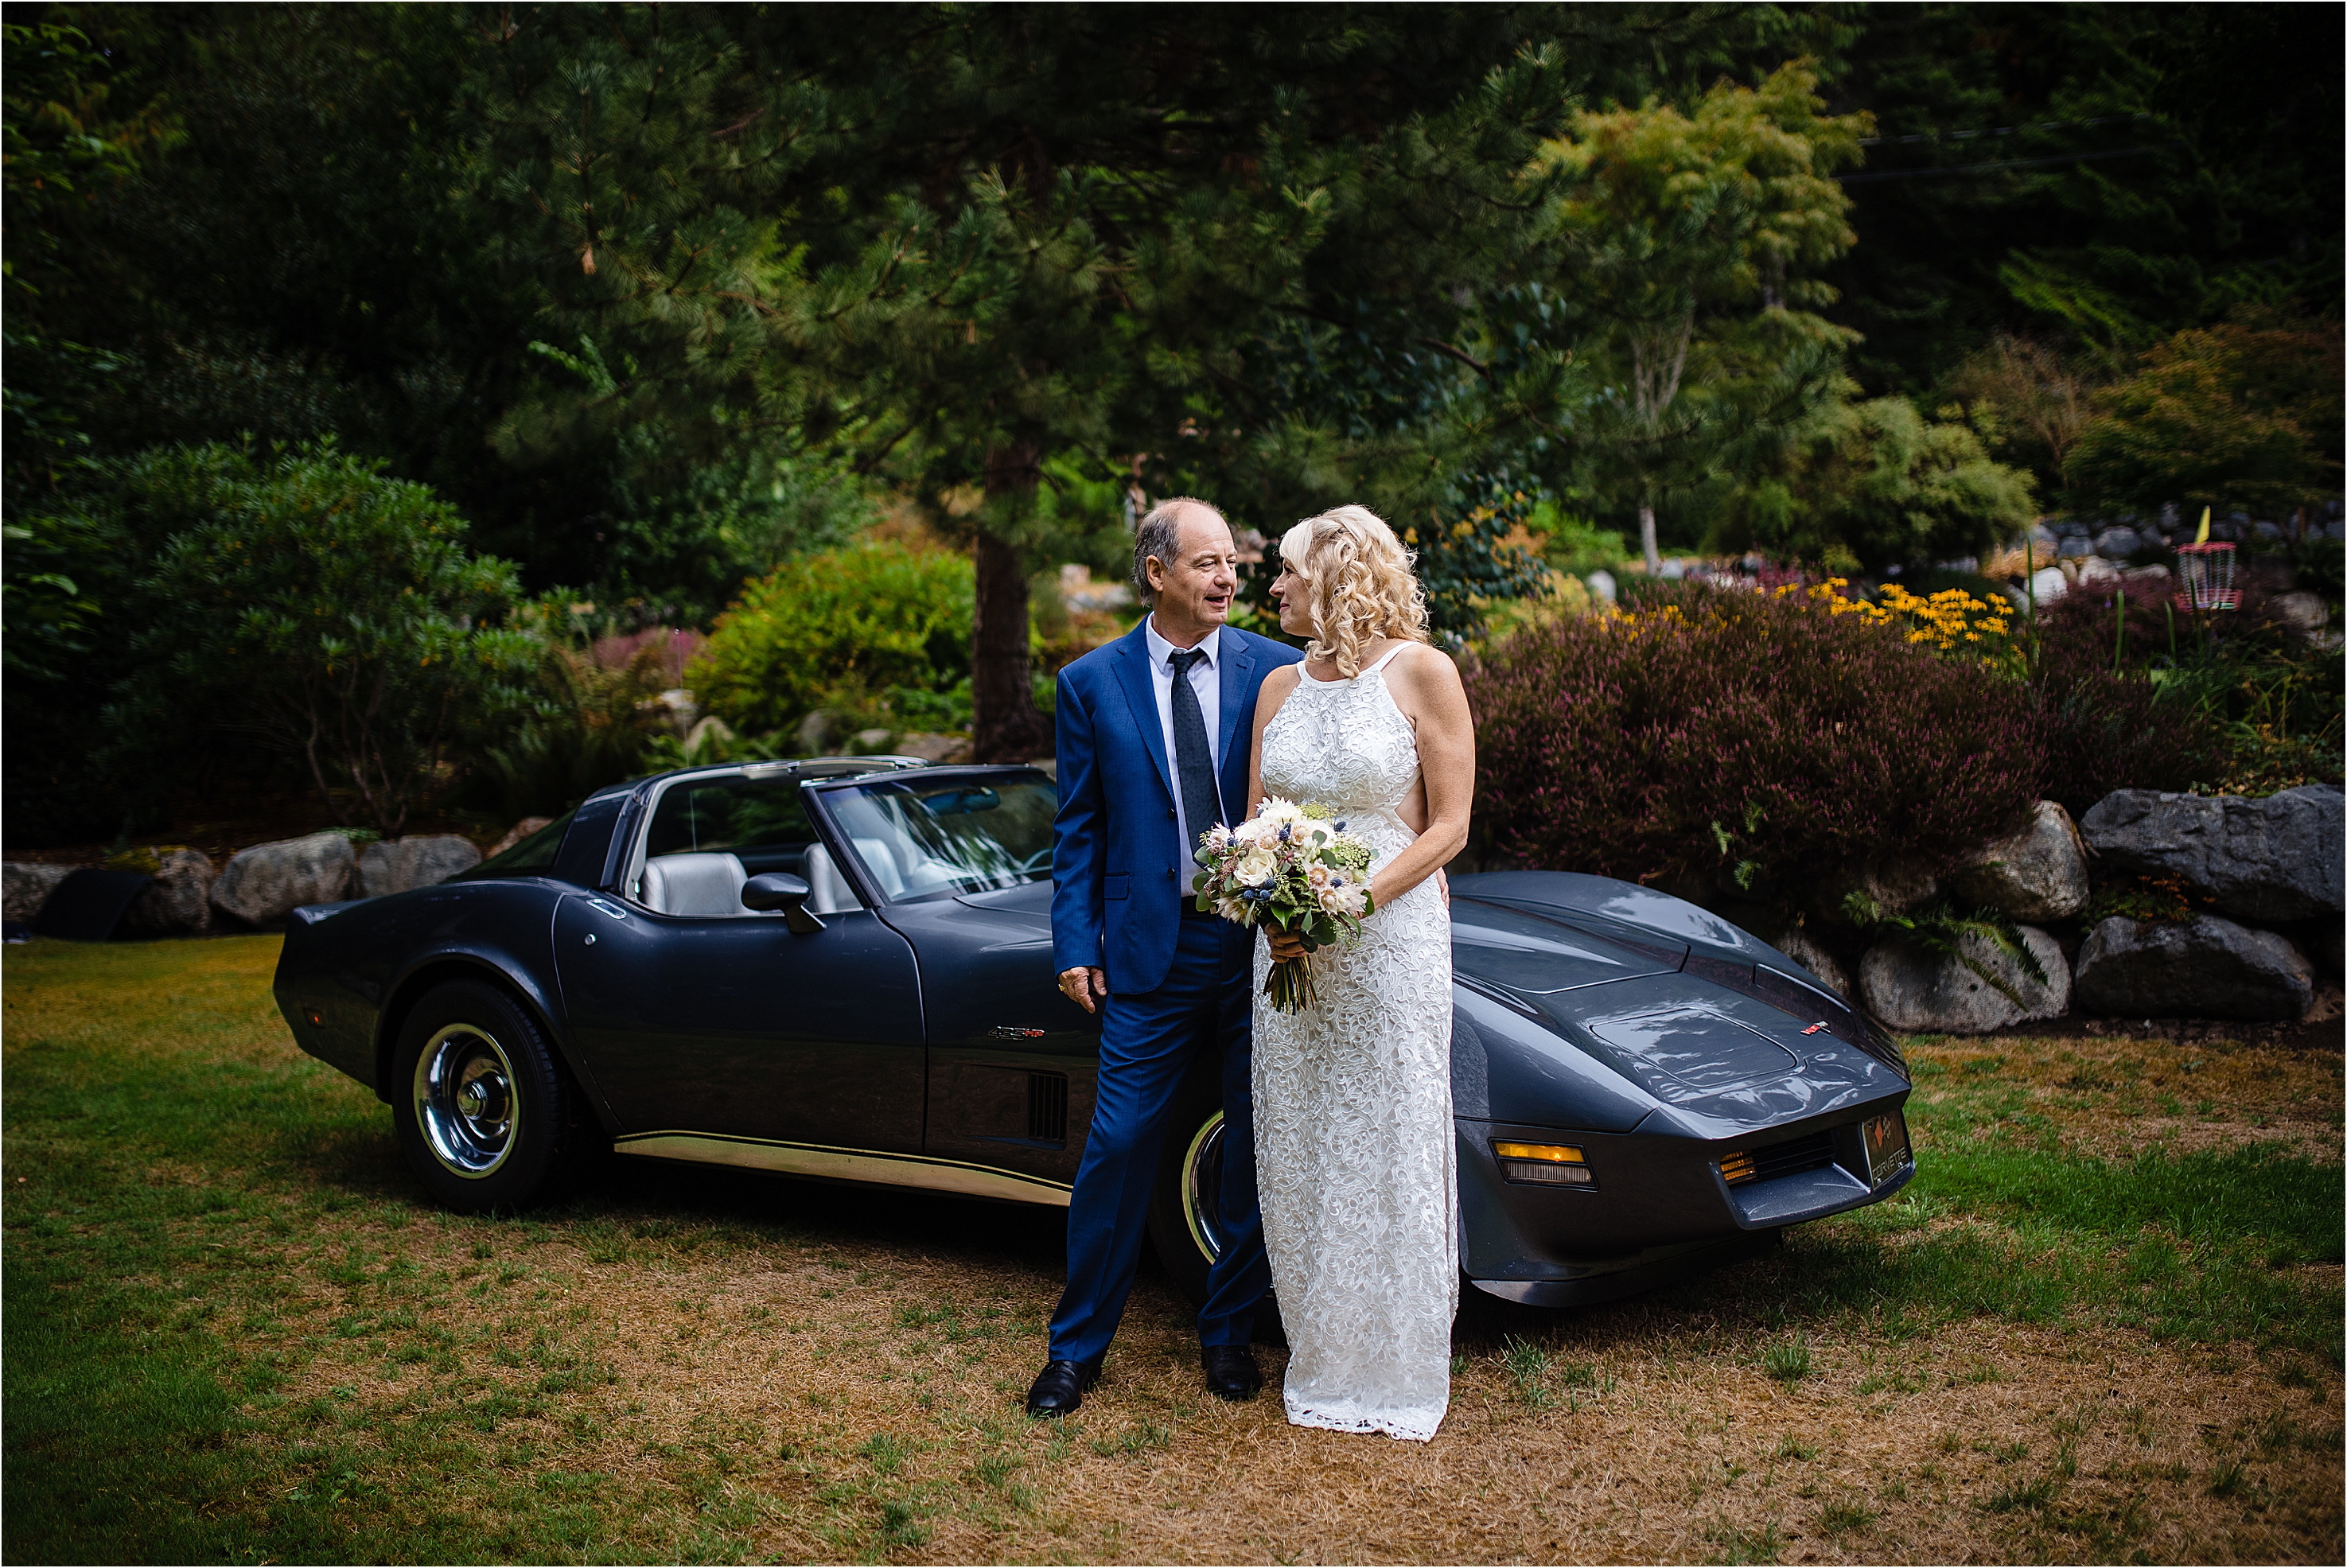 Bride and Groom stand in front of his prized 81 Corvette